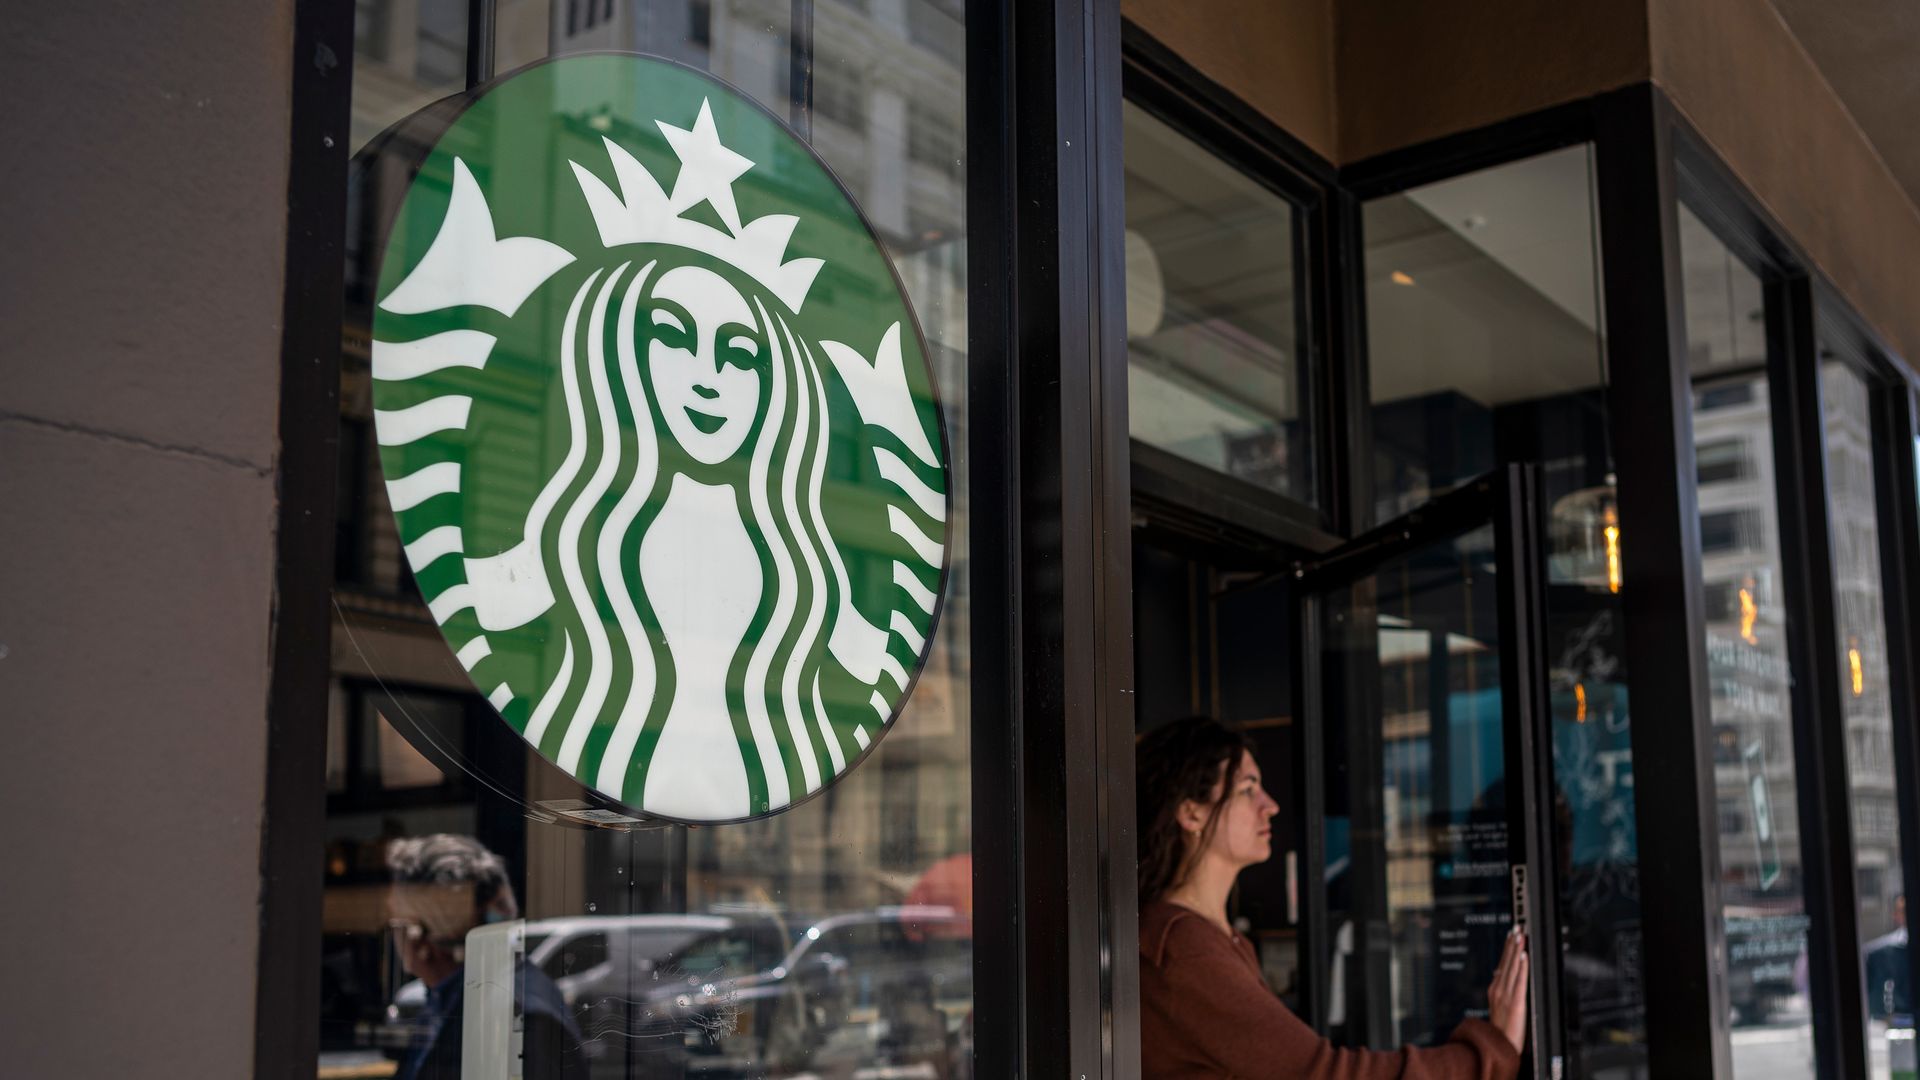 Picture of the Starbucks logo in a location, with a person walking out